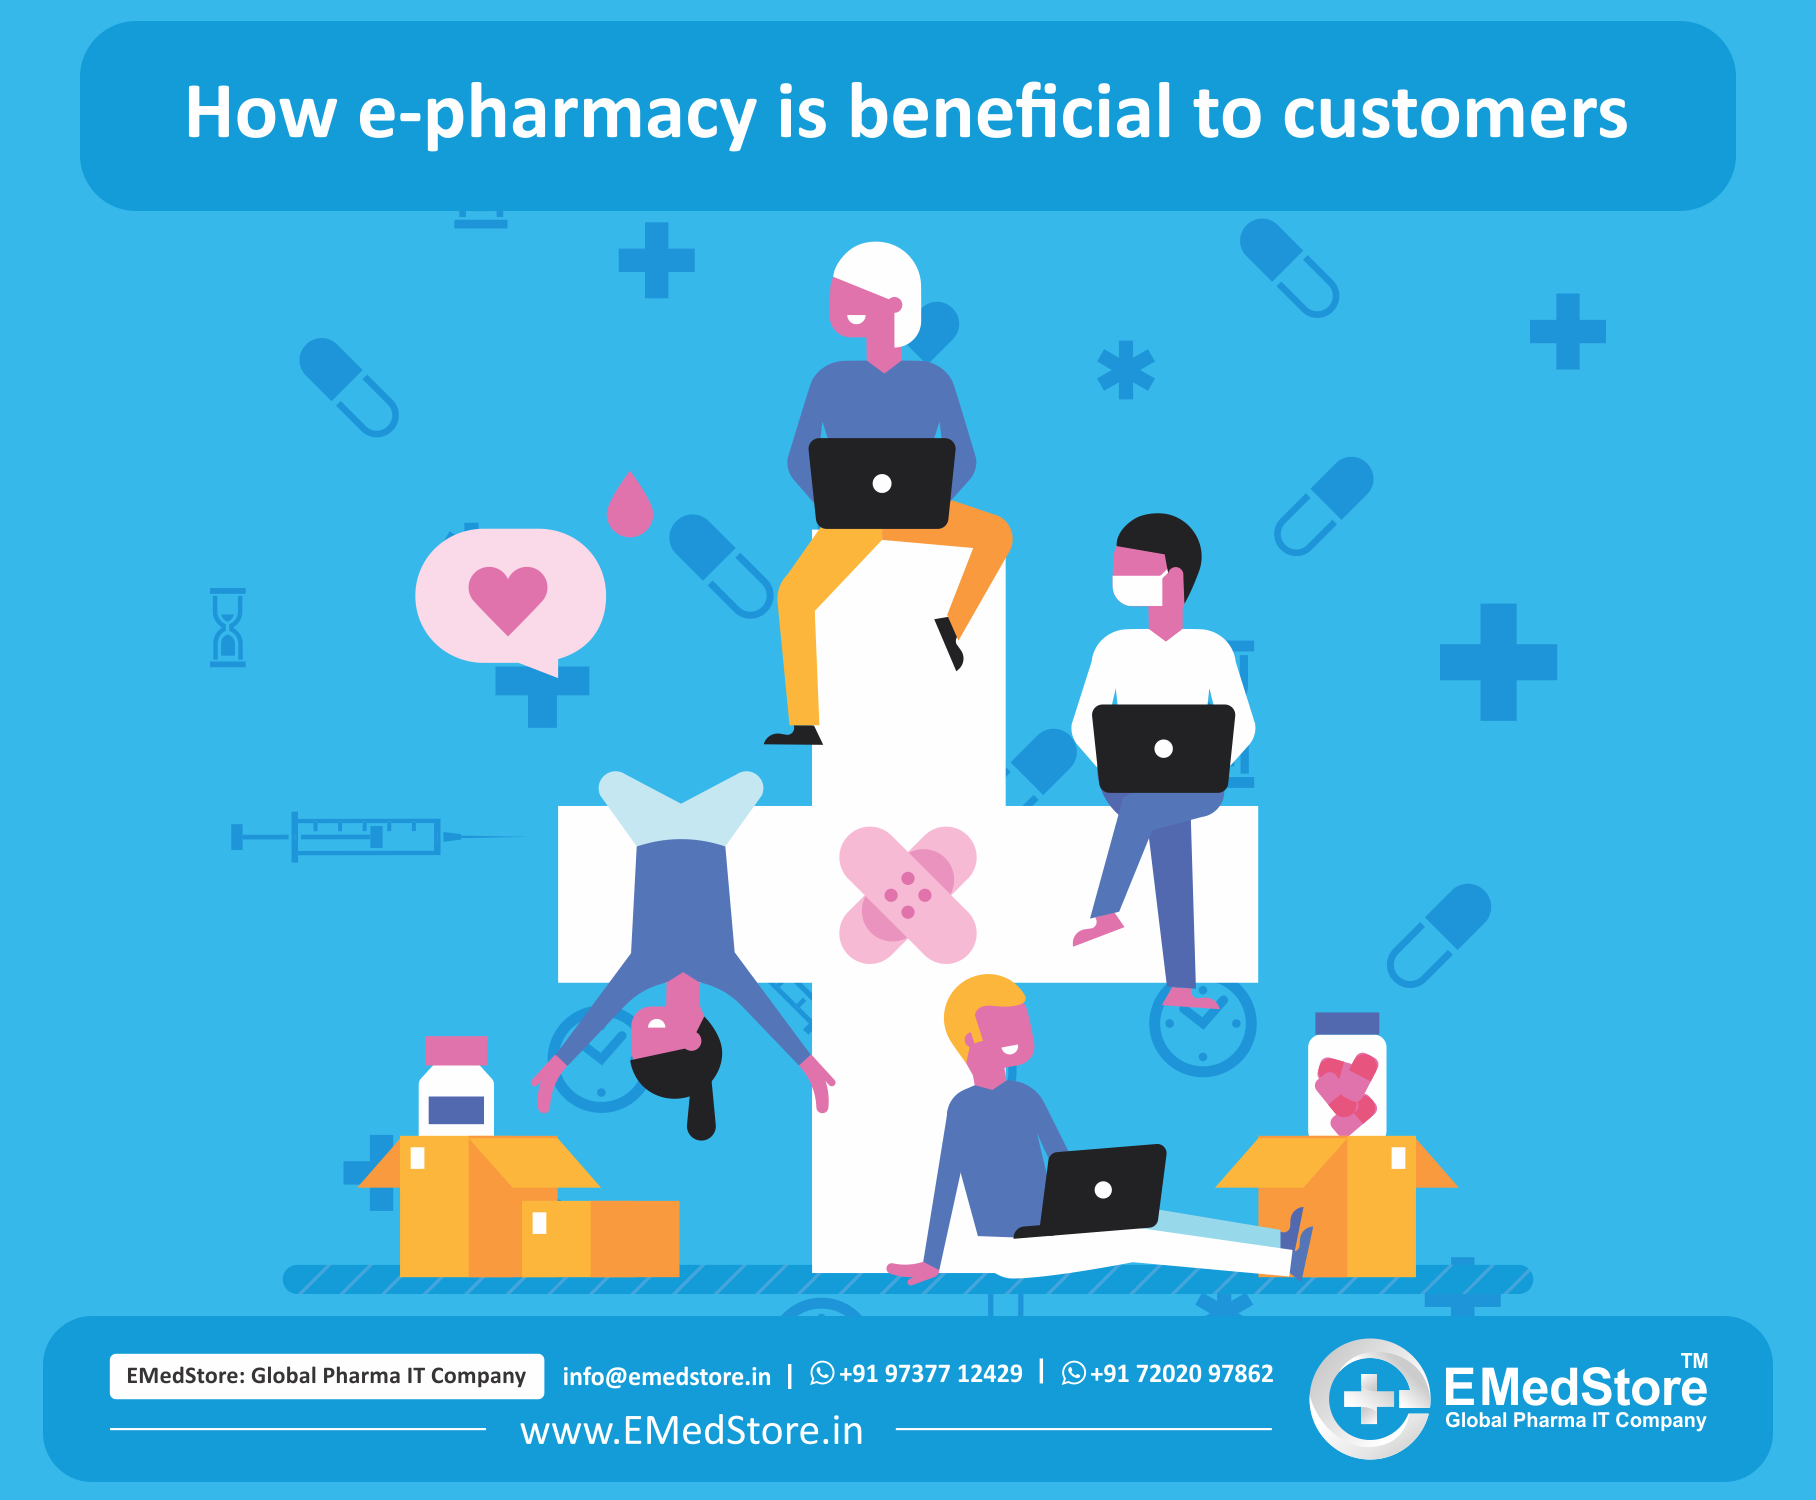 How e-pharmacy is beneficial to customers